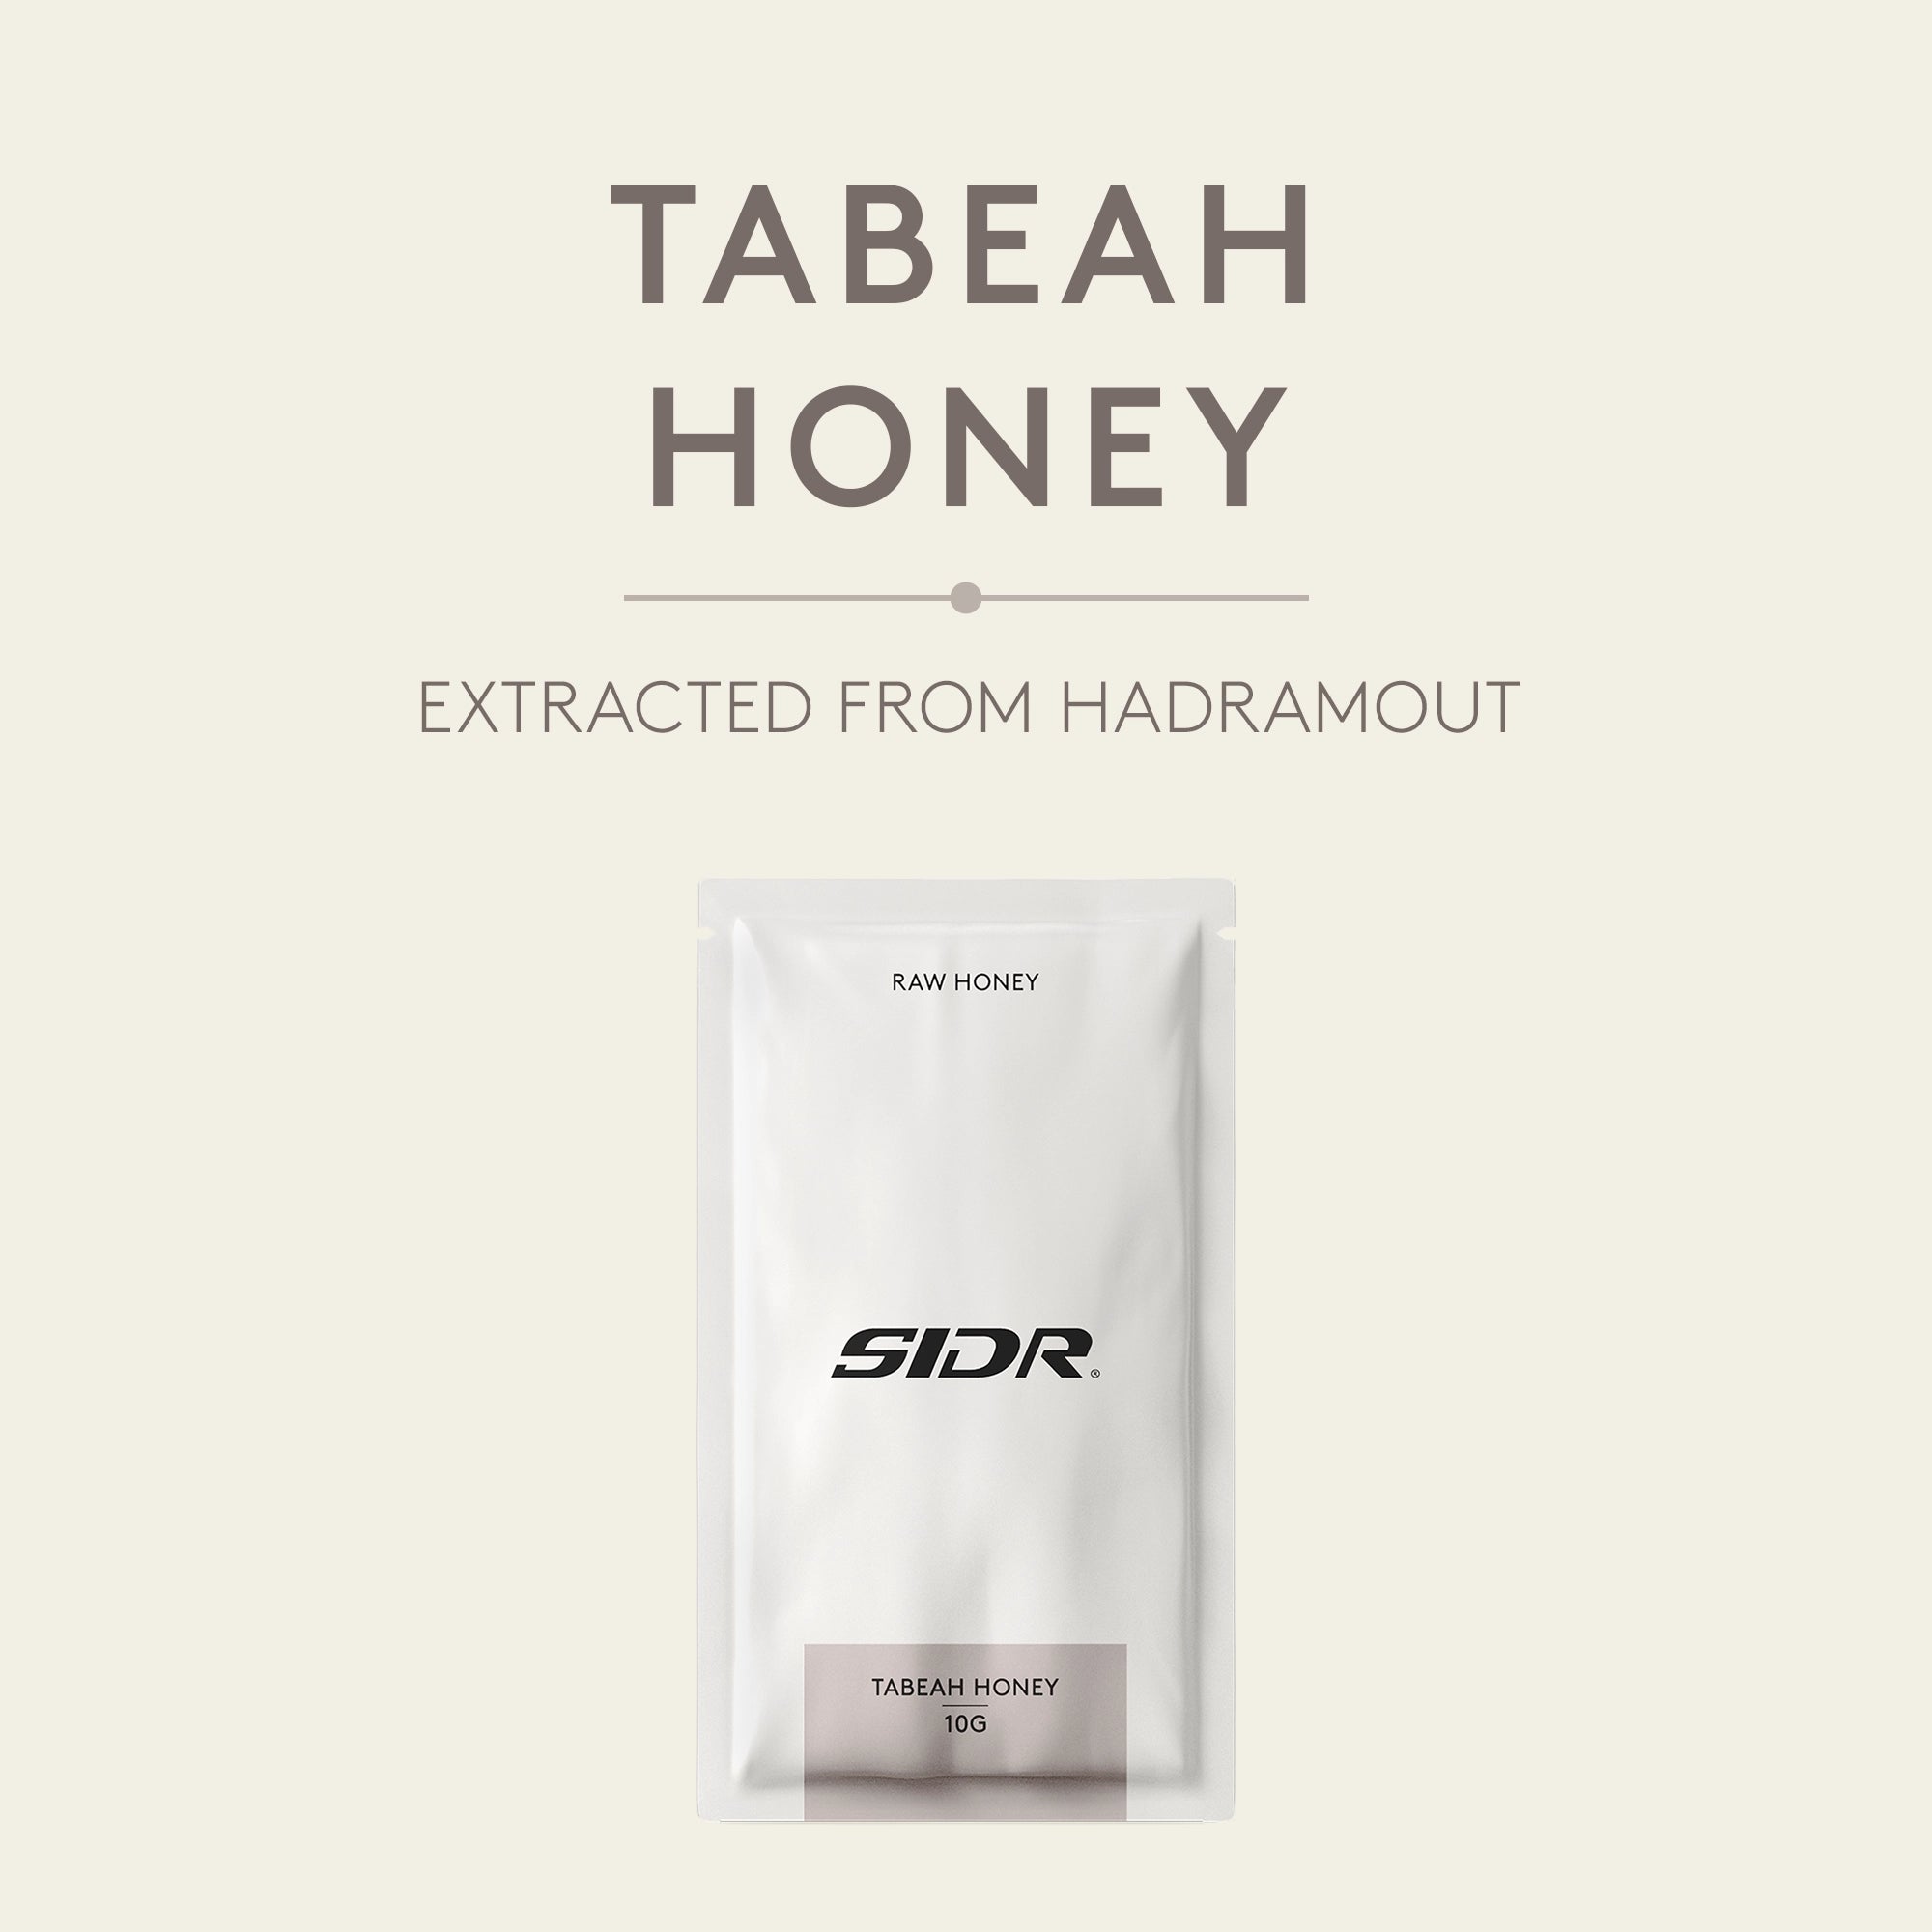 sidr tabeah honey packet from hadramout